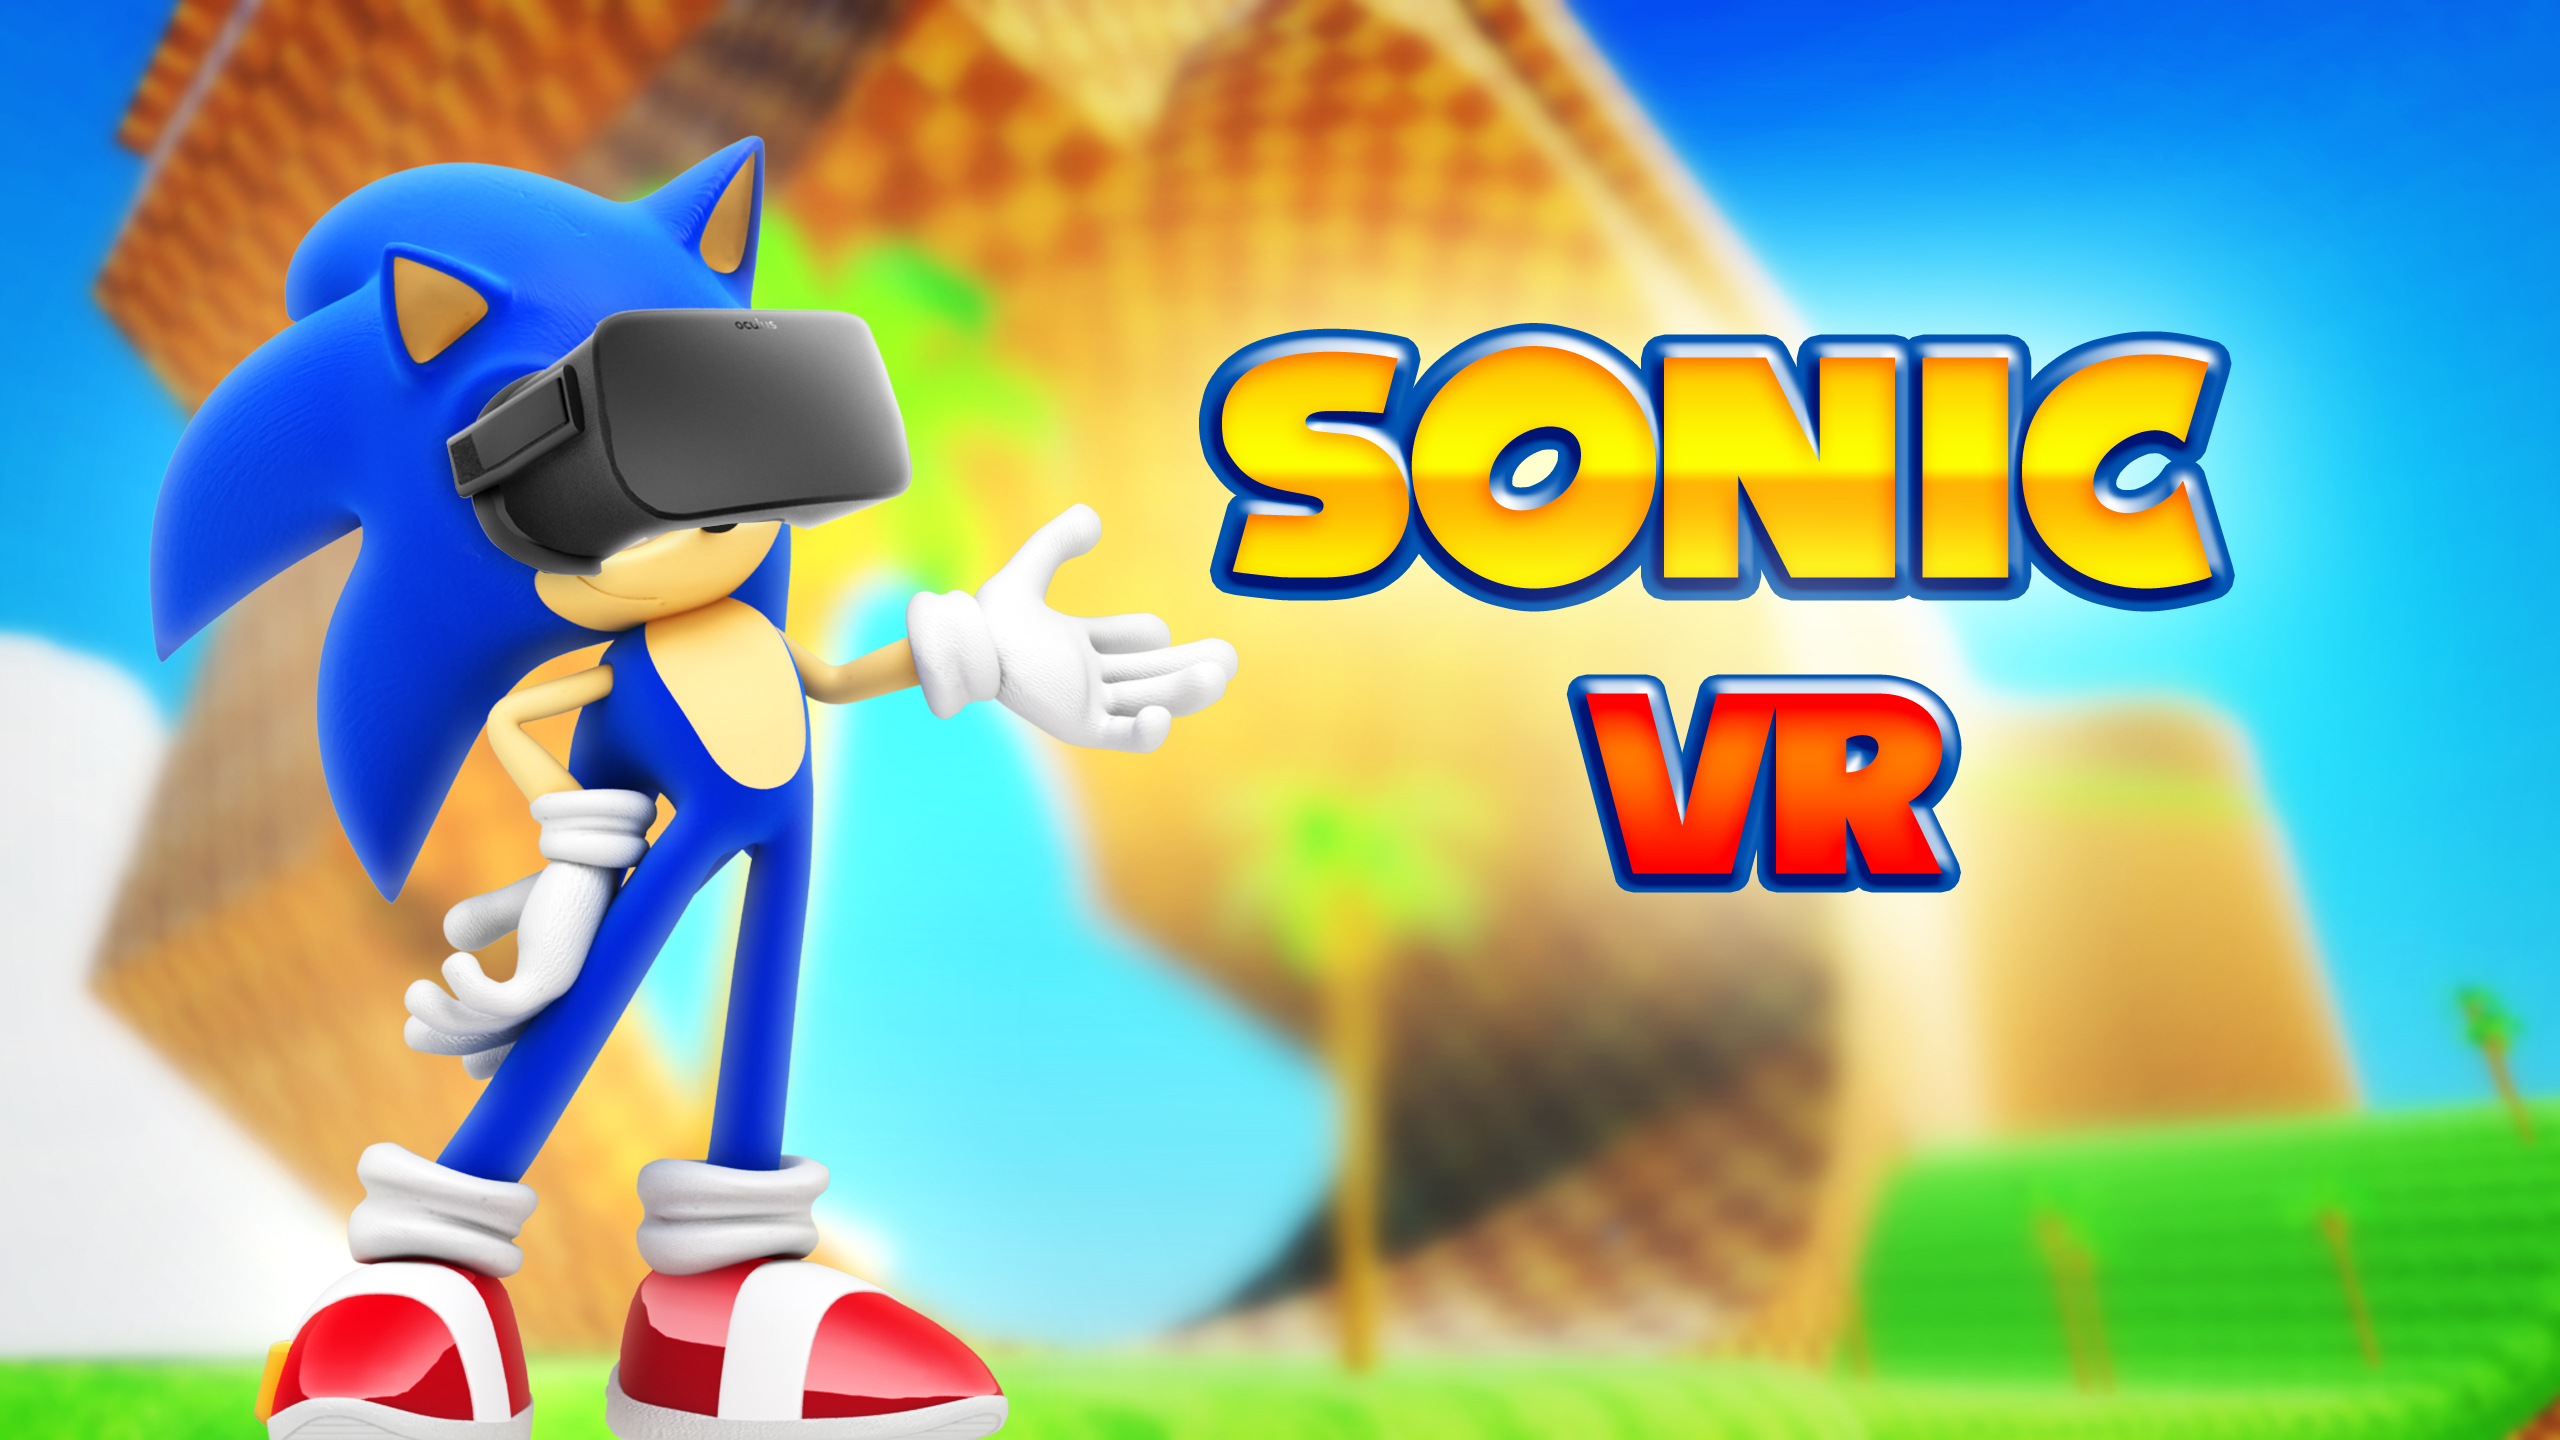 SonicVR for Oculus 2 - The Best Sonic the Hedgehog Products